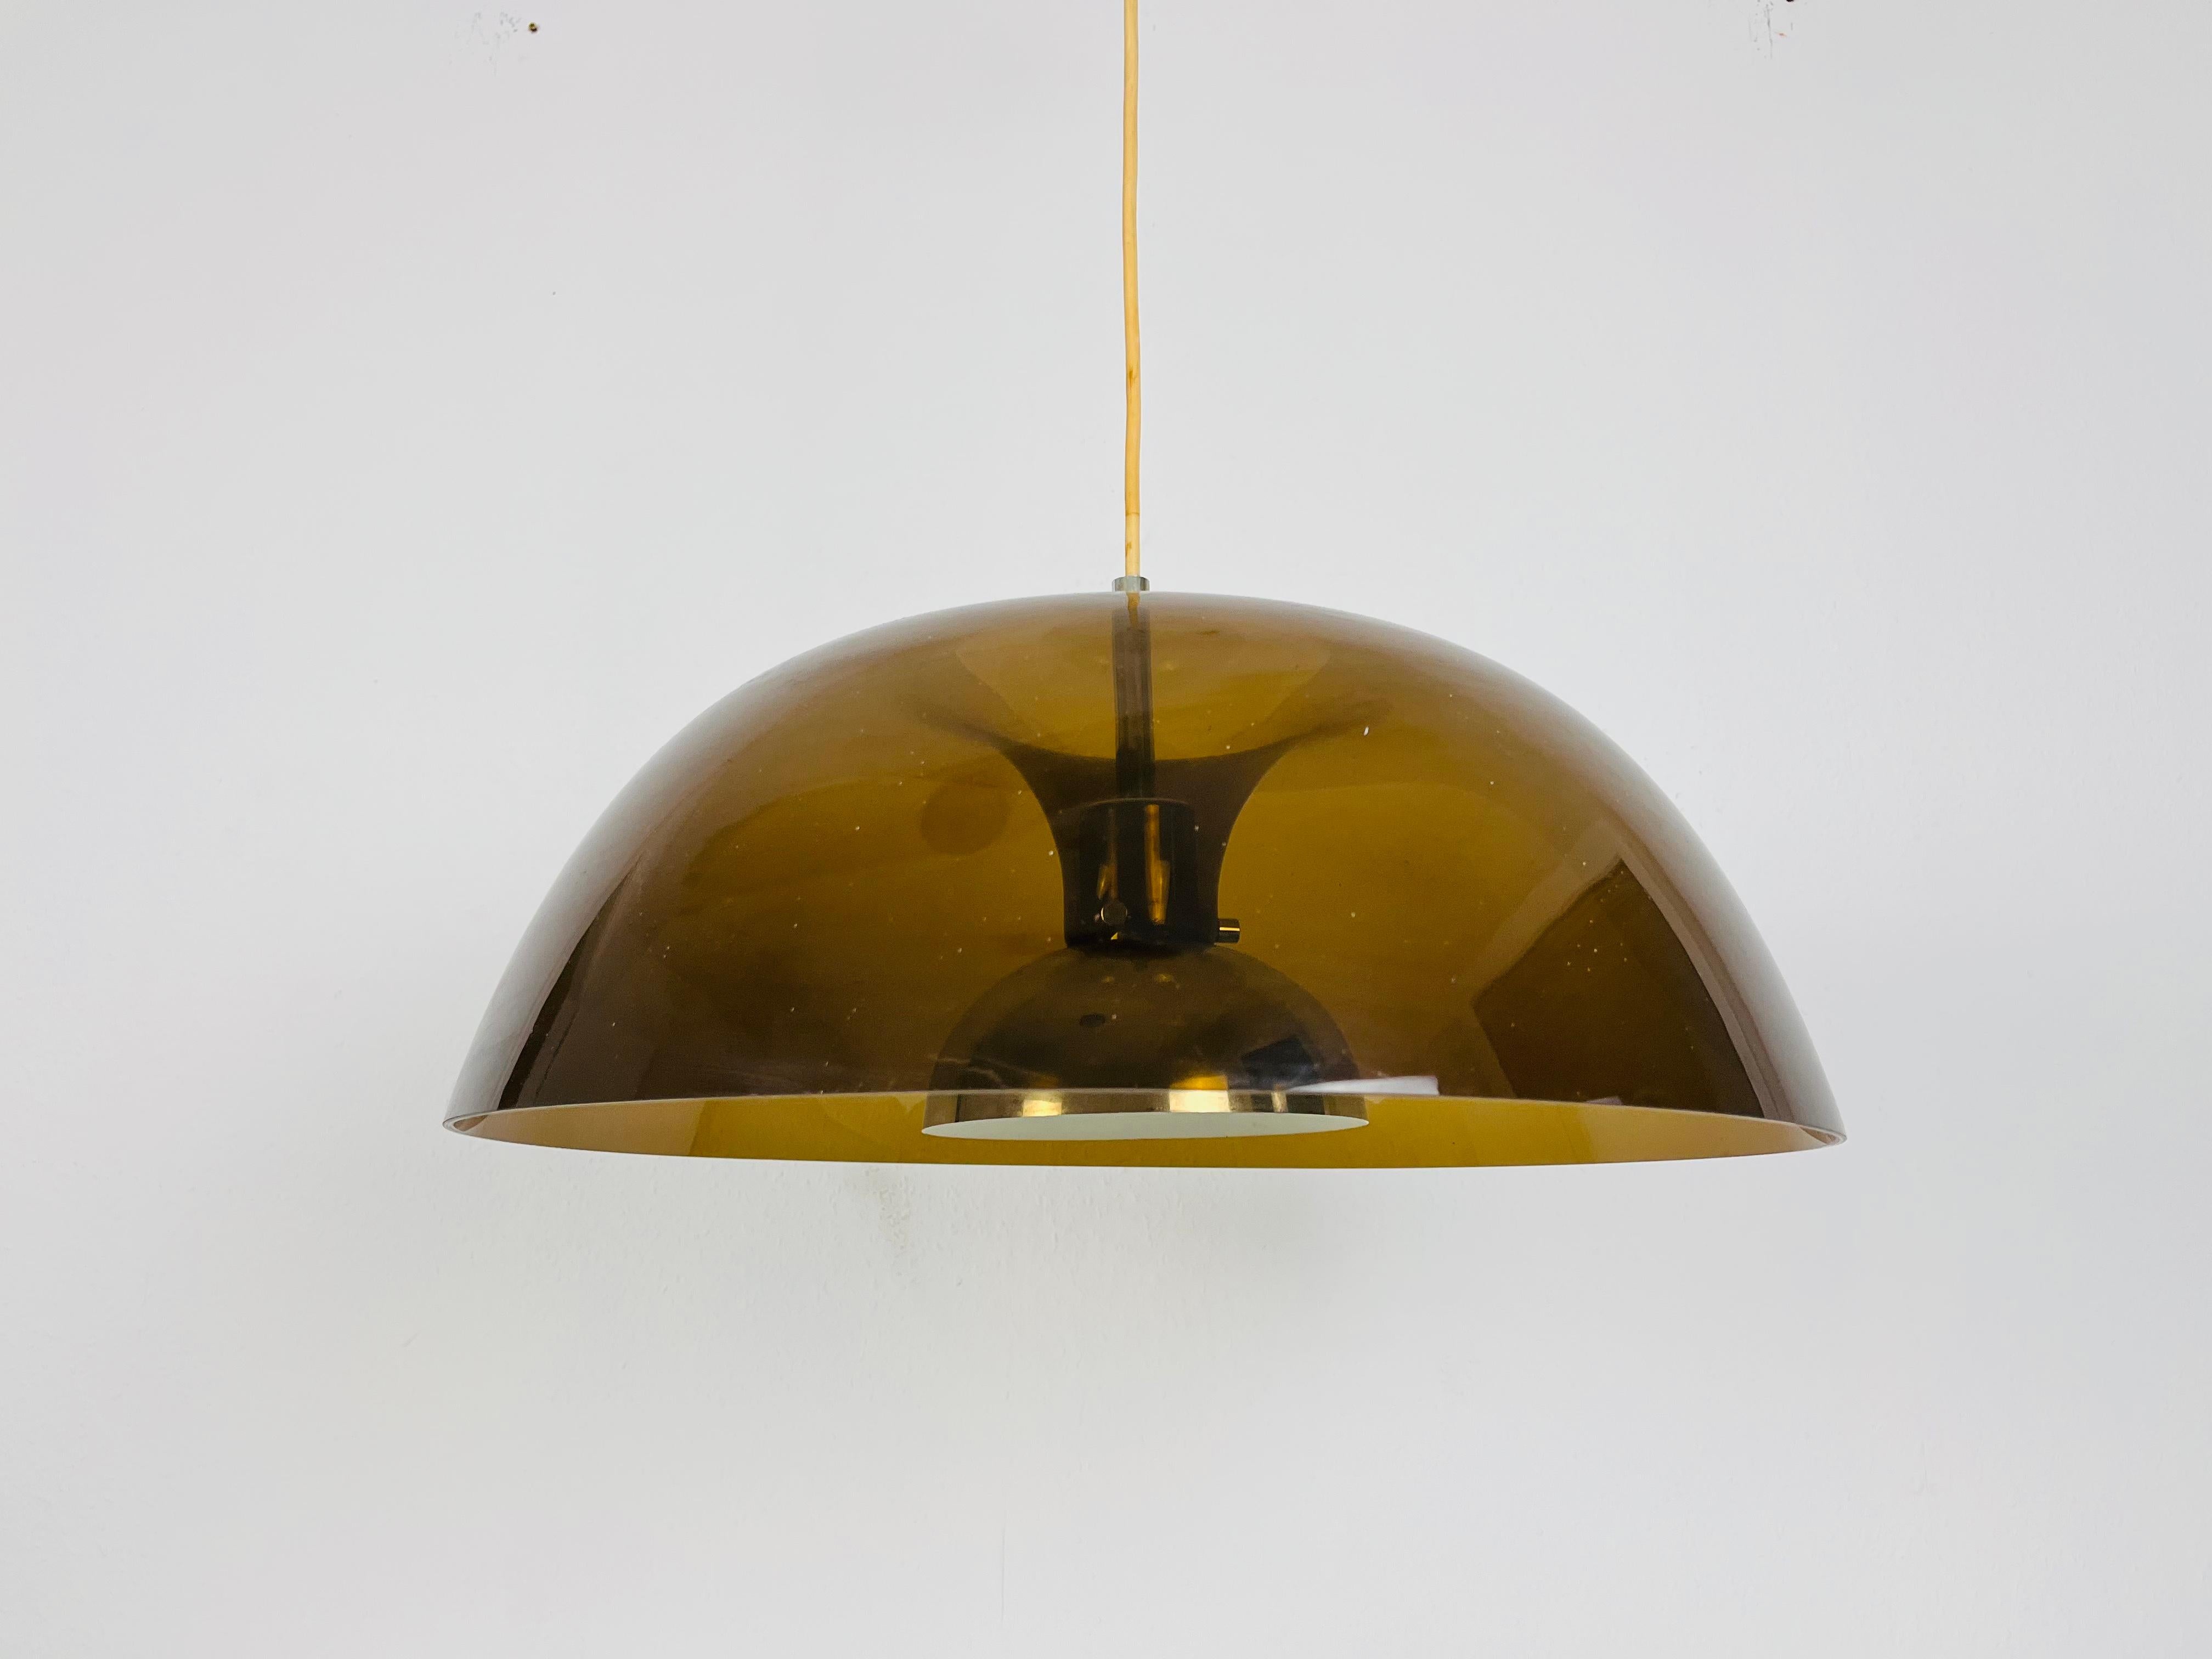 Vintage pendant lamp by Temde in the 1970s. It is made from acrylic glass and plastic.

Measurements:

Height: 20-80 cm
Diameter: 50 cm 

The light requires one E27 light bulb. Works with both 120/220V. Good vintage condition.

Free